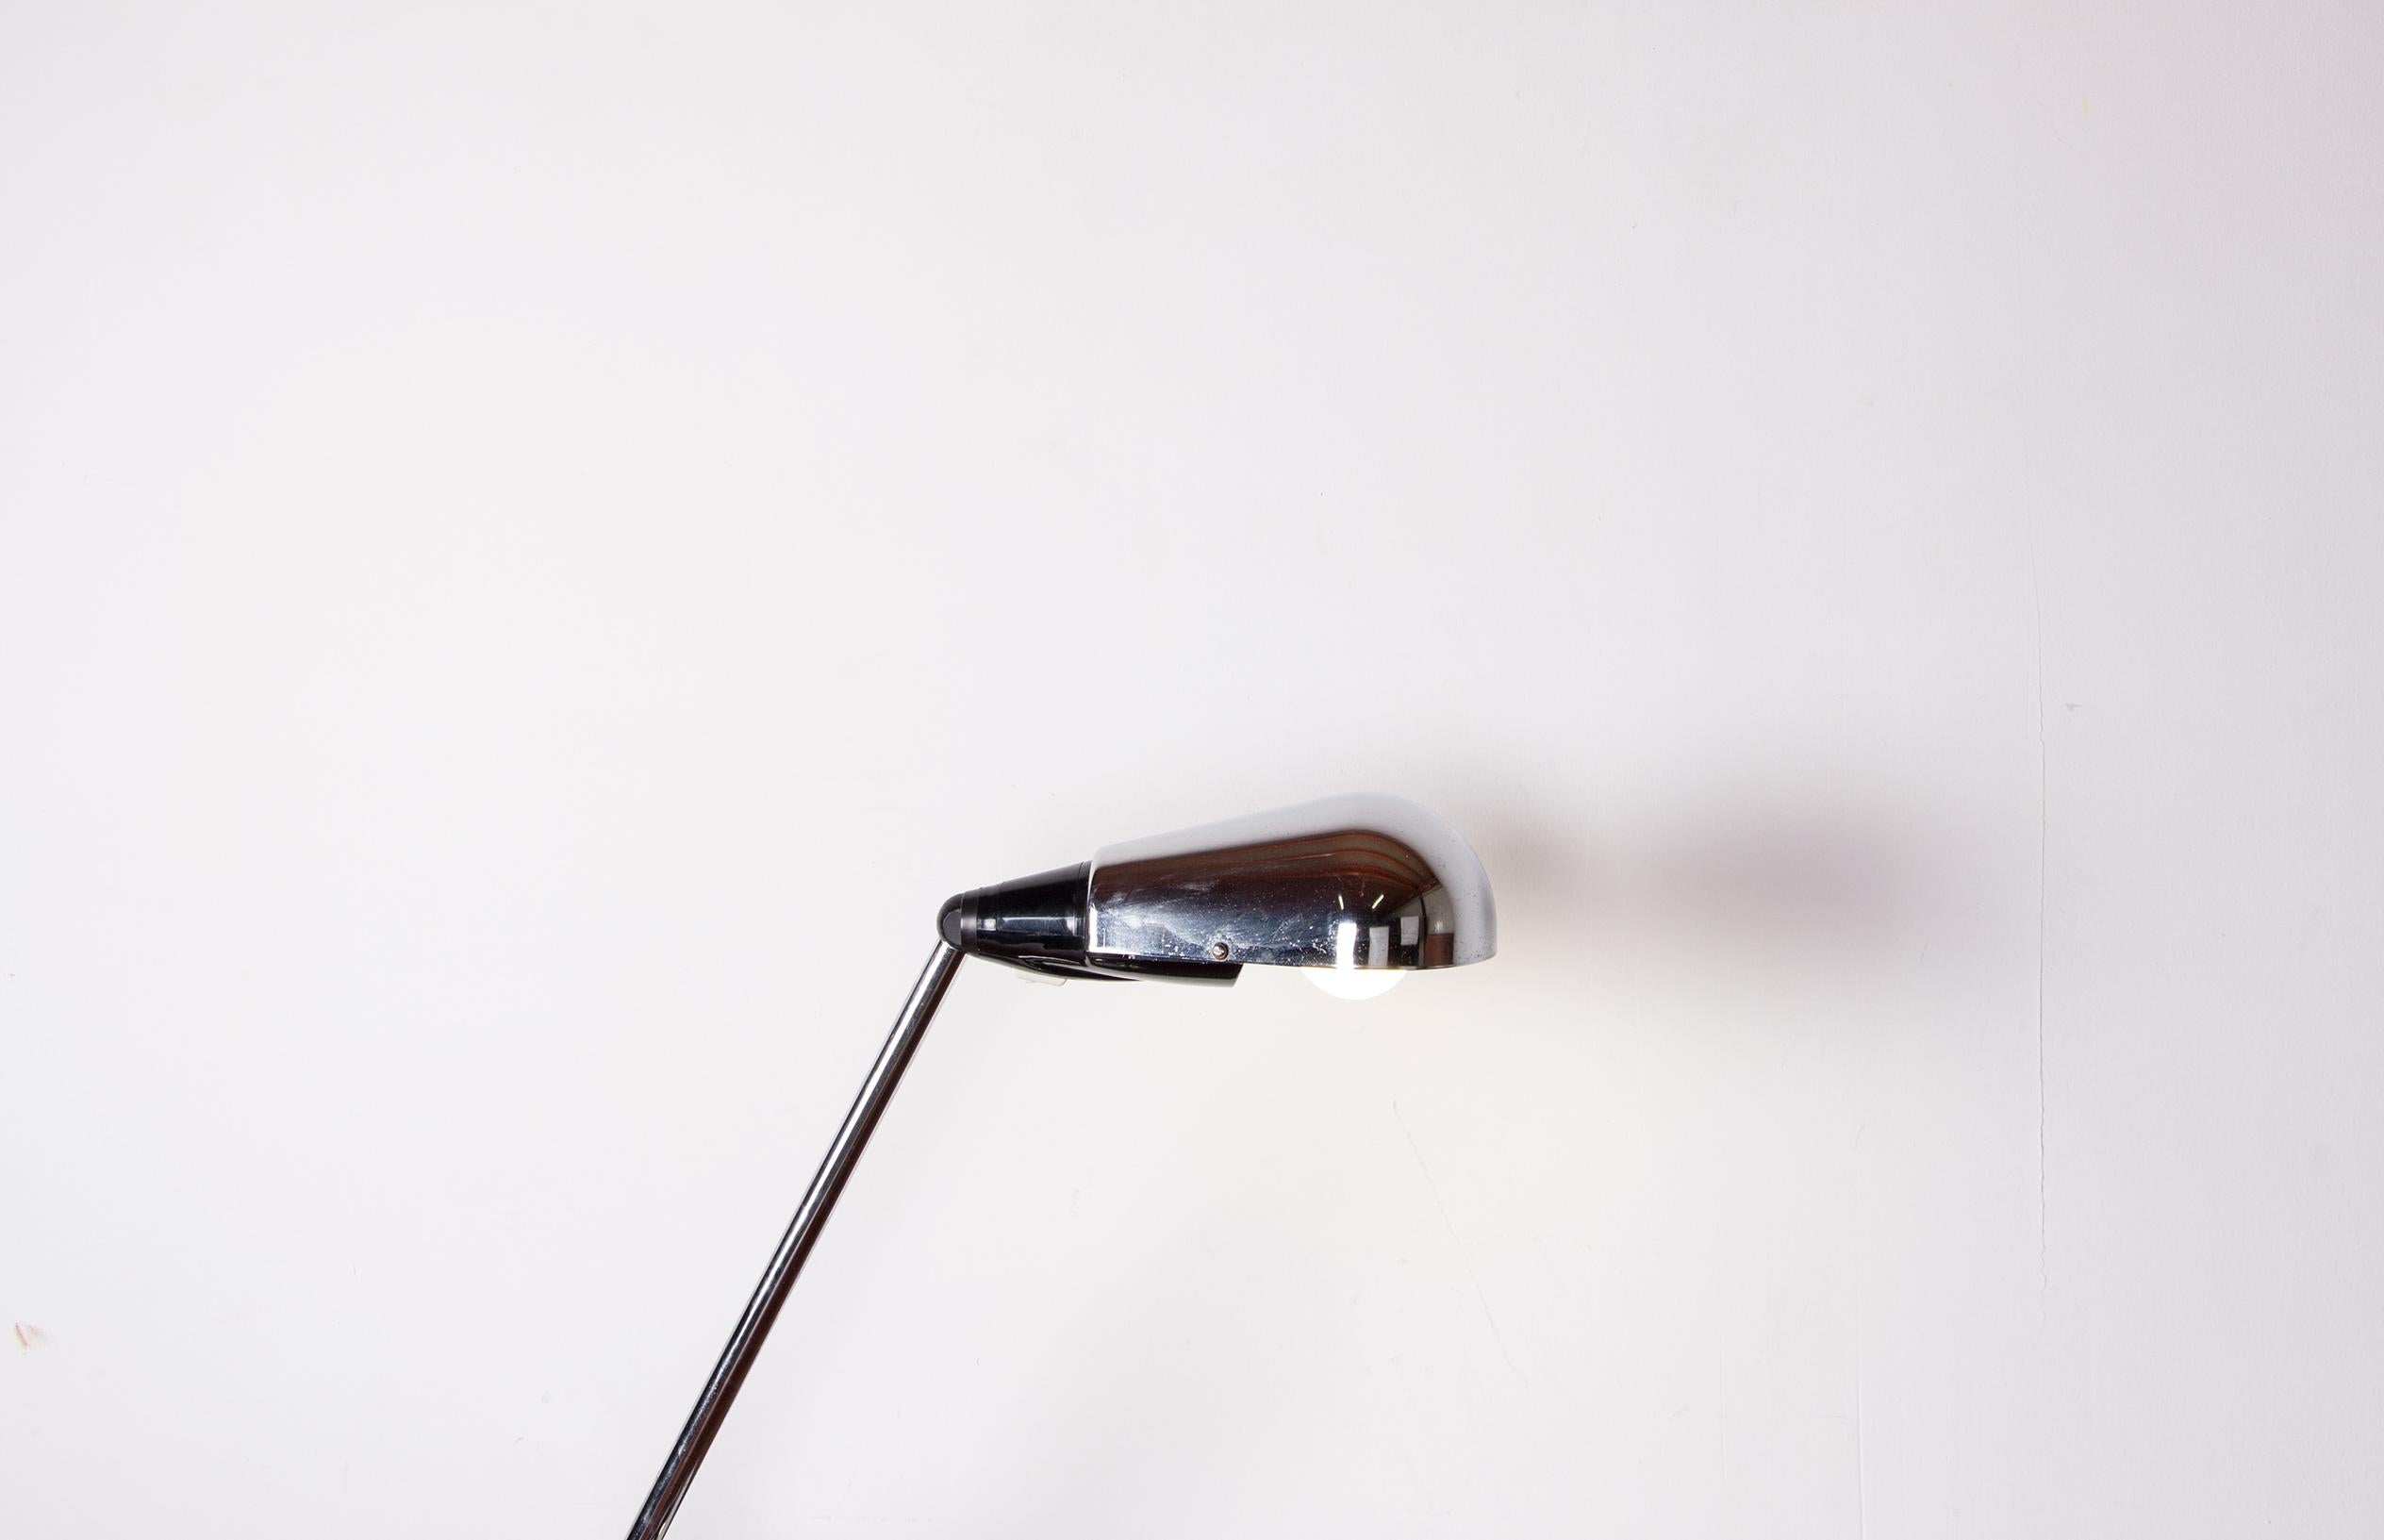 Important desk lamp in brushed steel with arm and removable head, on spherical base. Ovoid-shaped light cover. Circa 1960.